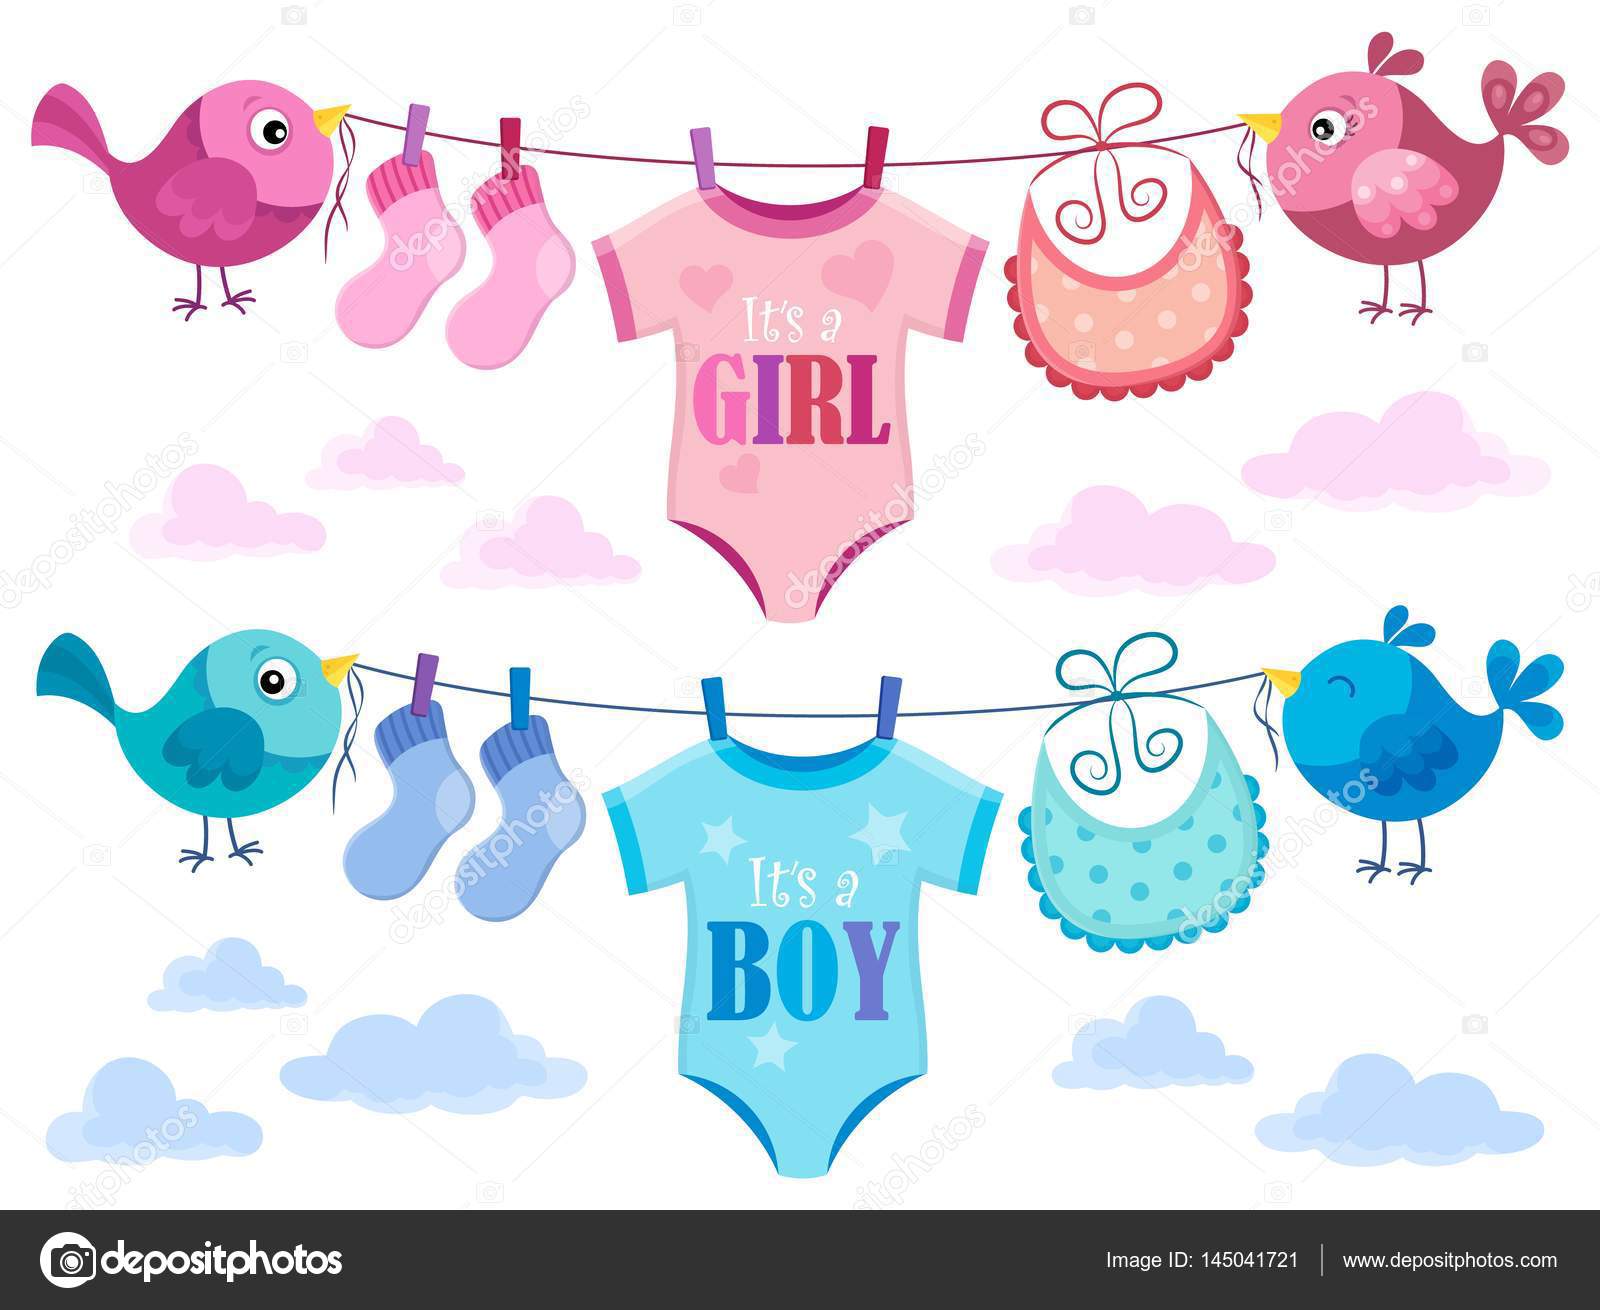 Is it a girl or boy topic 3 - eps10 vector illustration. 